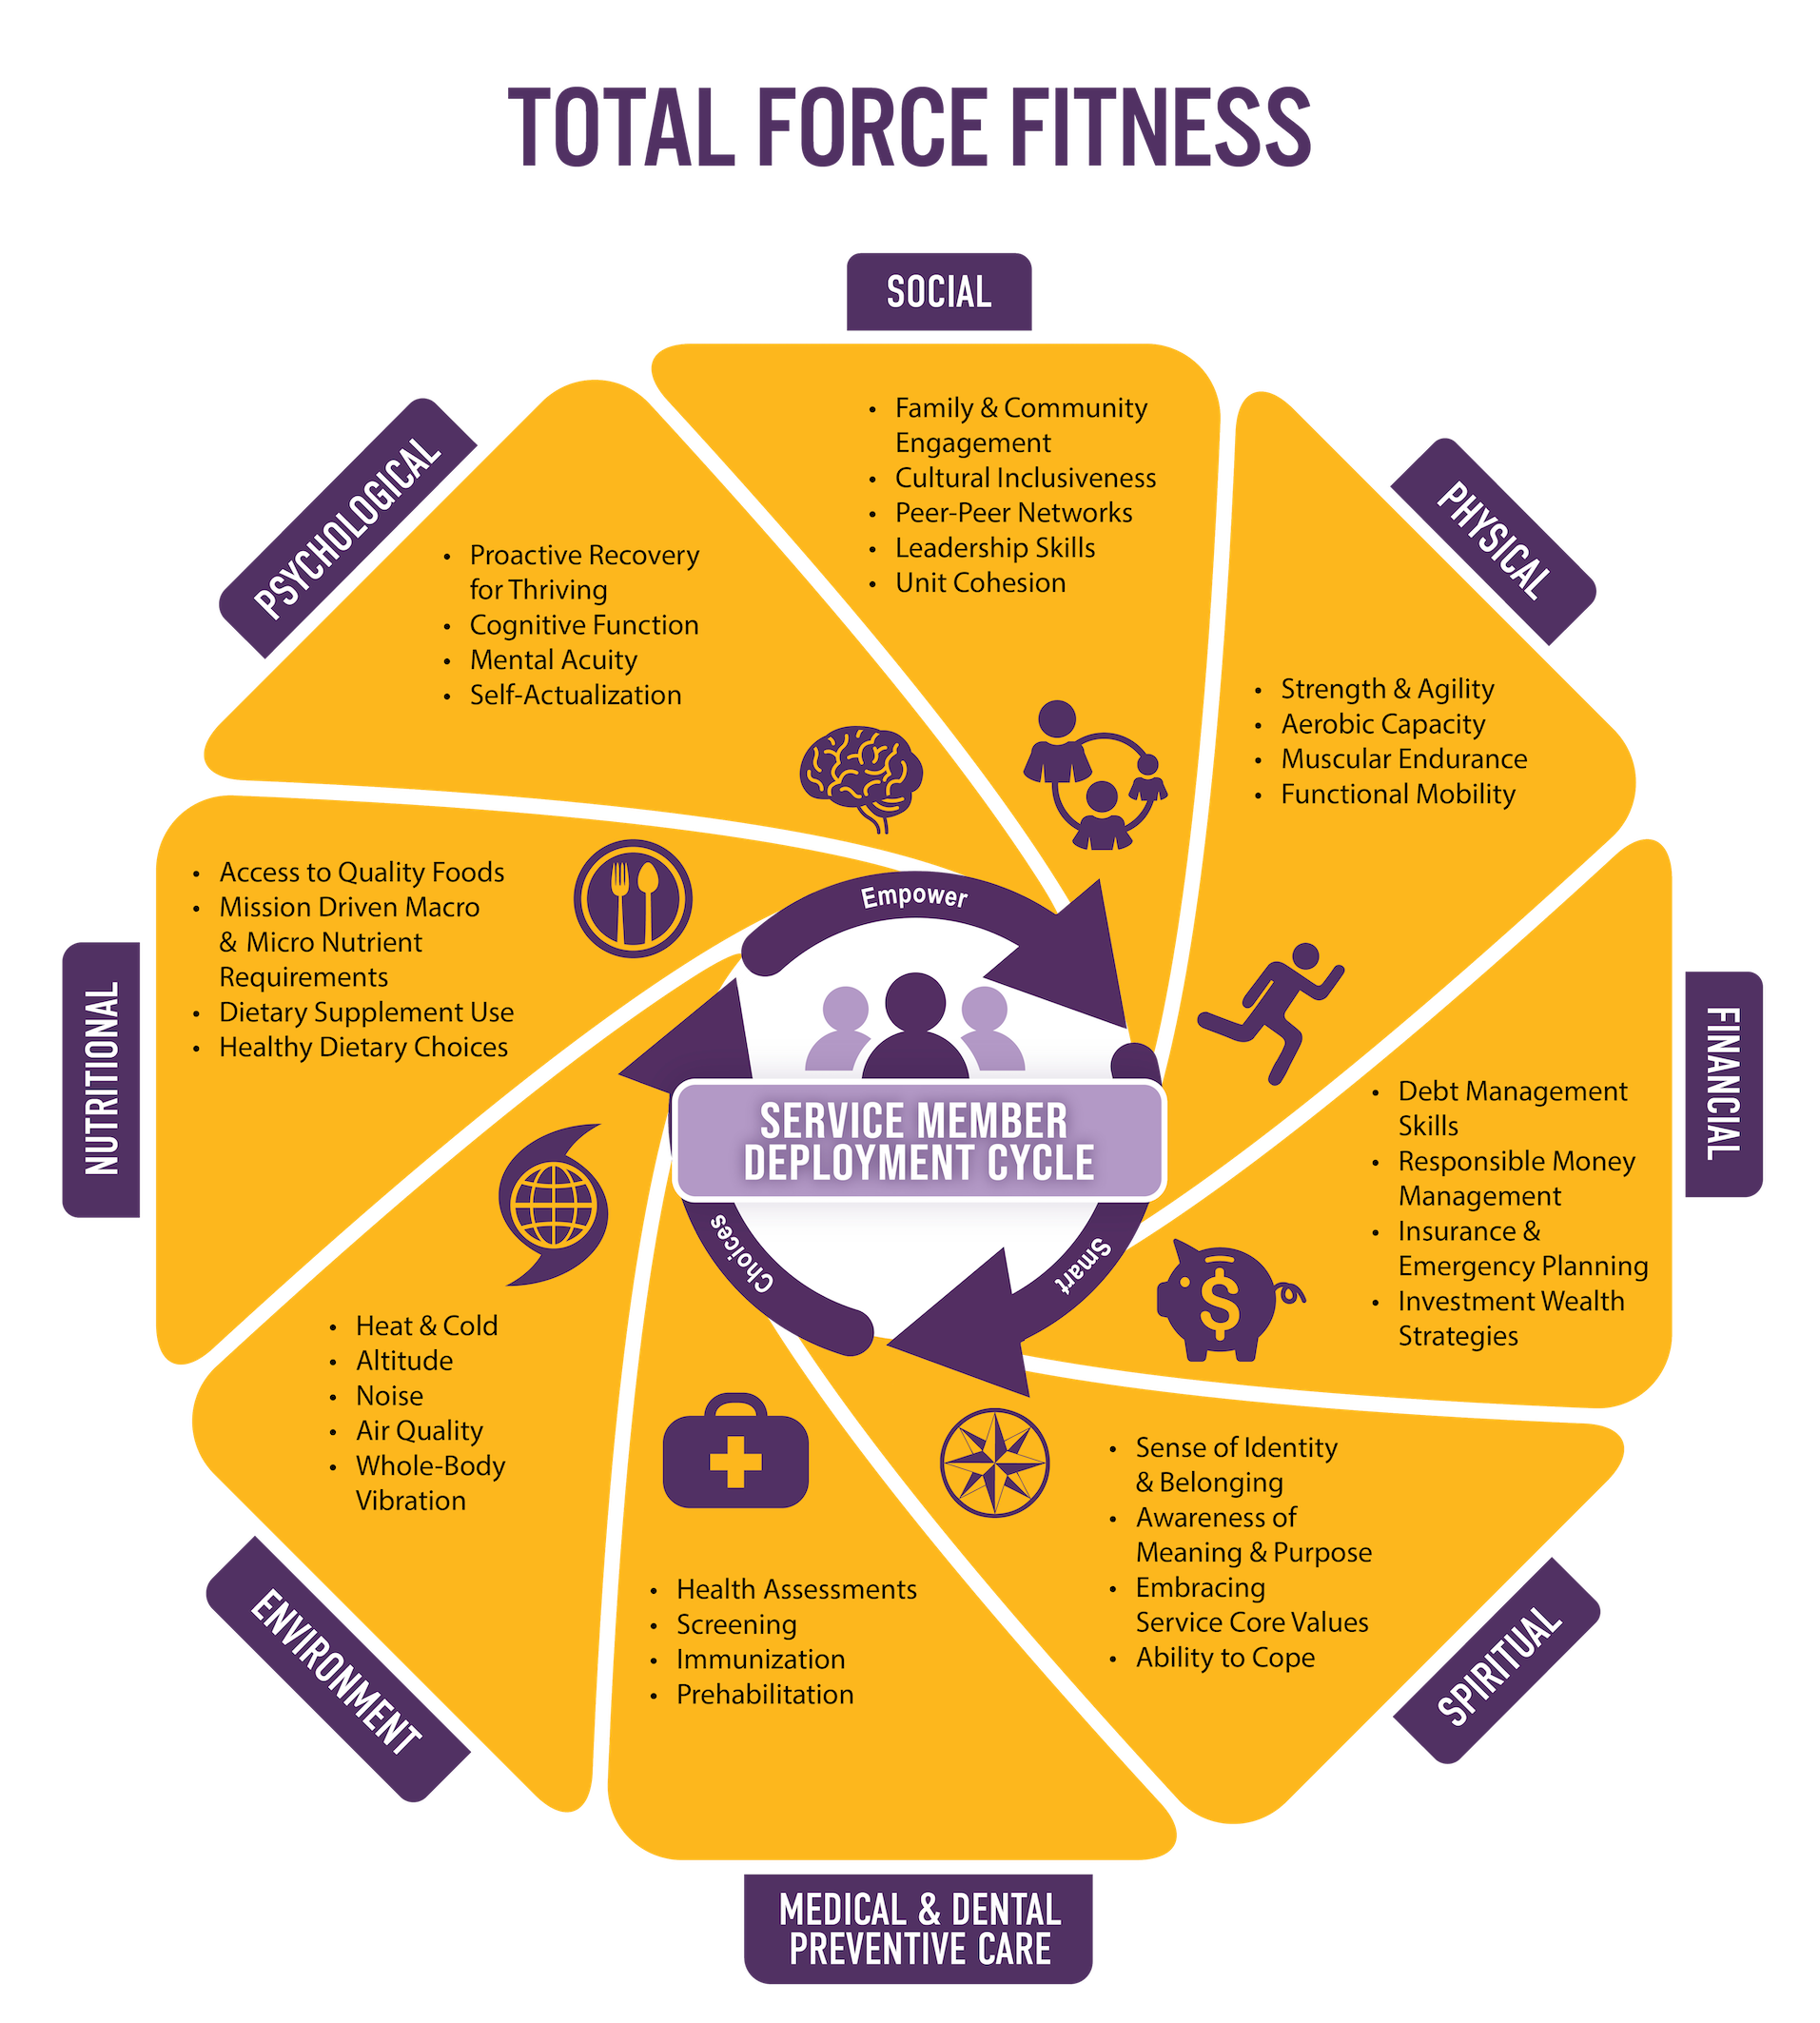 The Total Force Fitness framework consists of life domains that are key to health and performance. Each domain contains information that empowers Military Service Members to make smart choices about their well-being throughout the deployment cycle. Social domain includes family and community engagement, cultural inclusiveness, peer-to-peer networks, leadership skills, and unit cohesion. Physical domain consists of strength and agility, aerobic capacity, muscular endurance, and functional mobility. Financial domain consists of debt management skills, responsible money management, insurance and emergency planning, and investment wealth strategies. Ideological & Spiritual domain includes sense of identity and belonging, awareness of meaning and purpose, embracing service core values, and ability to cope. Medical & Dental Preventive Care domain consists of health assessments, screening, immunization, and prehabilitation. Environmental domain includes heat and cold, altitude, noise, air quality, whole-body vibration, and blast exposure. Nutritional domain consists of access to quality foods, mission-driven macro and micro nutrient requirements, dietary supplement use, and healthy dietary choices. Psychological domain includes proactive recovery for thriving, cognitive function, mental acuity, and self-actualization.